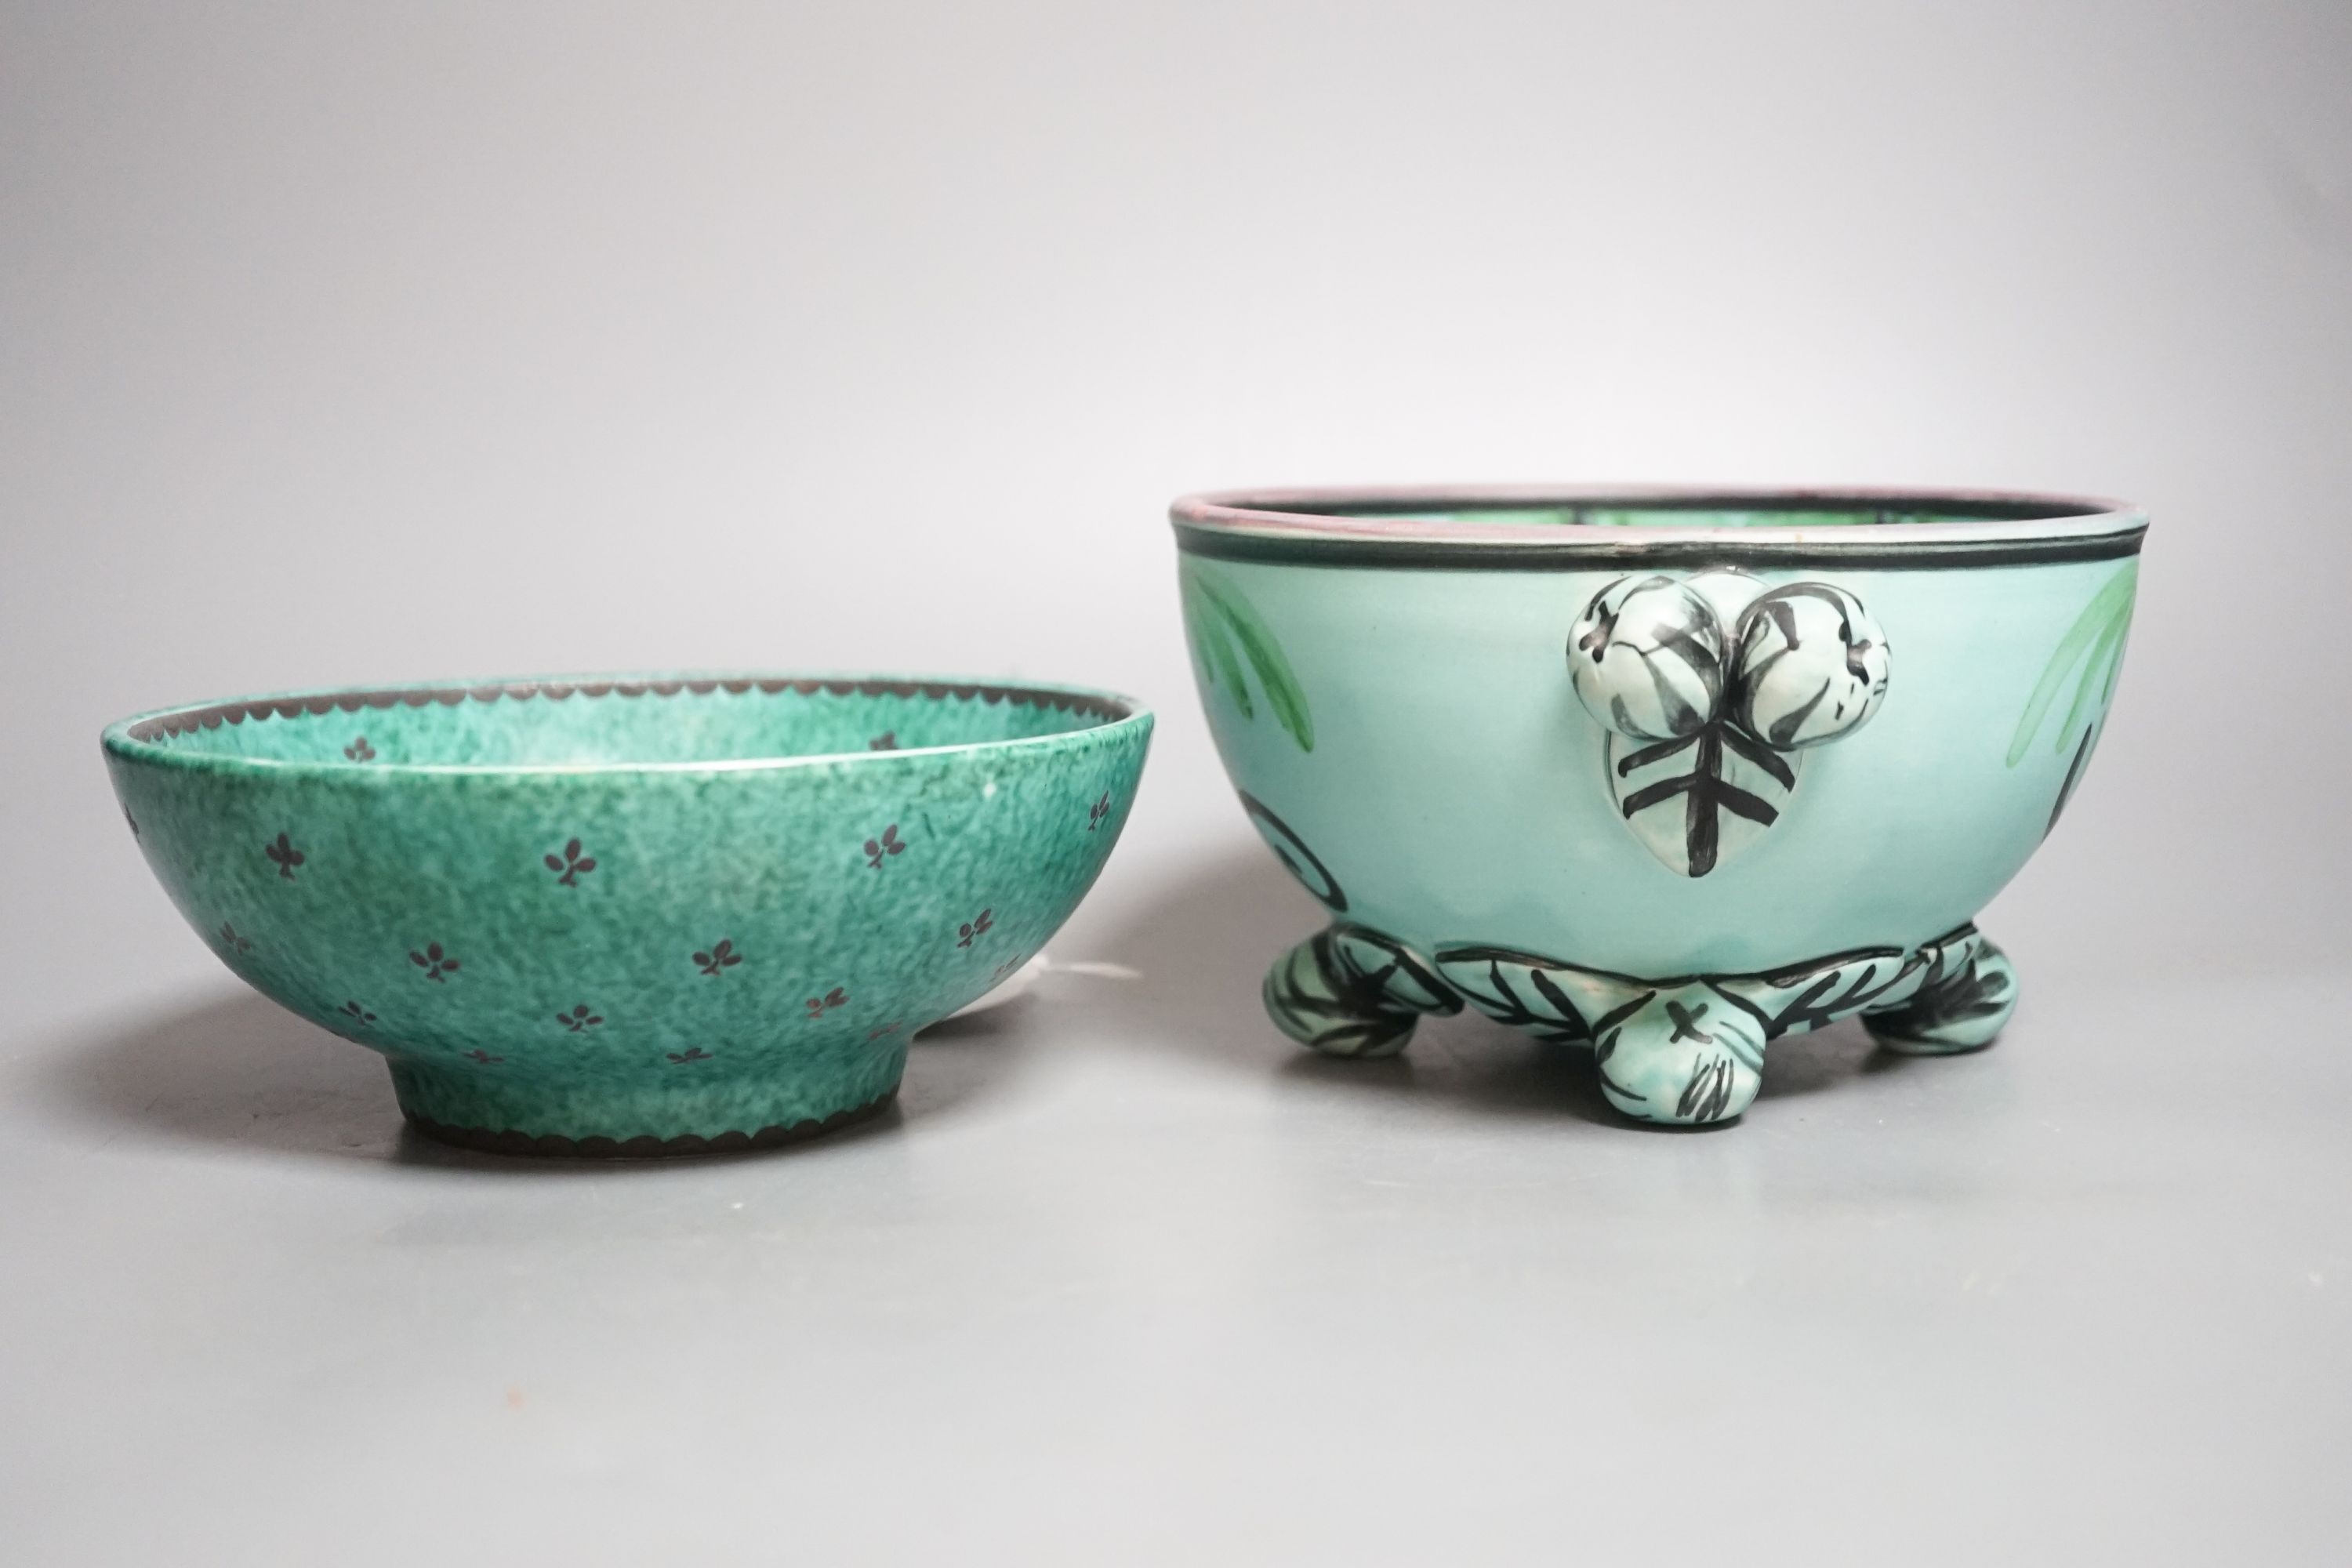 A Gustavsberg Argentaware bowl, designed by Wilhelm Kage and an Egersund two handled bowl 22cm